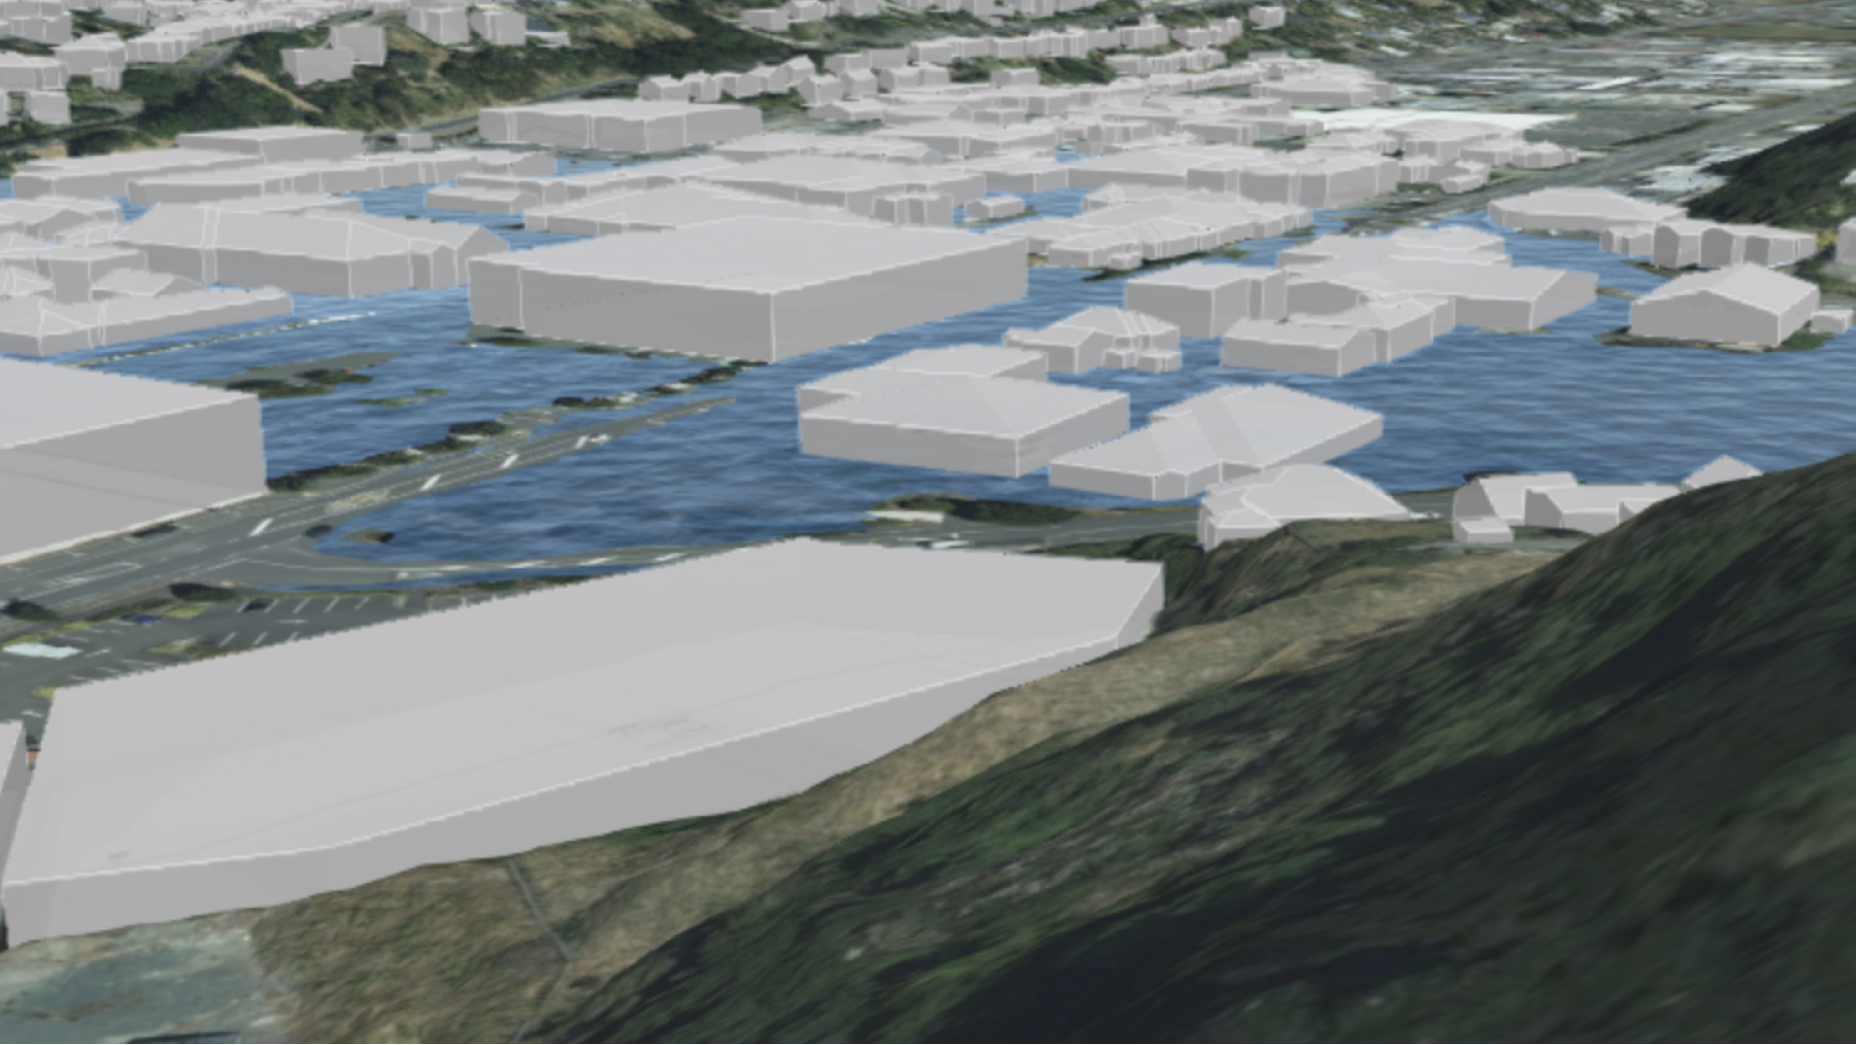 A 3D map with blue water and white blocks of ice illustrating a building impacted by potential flooding